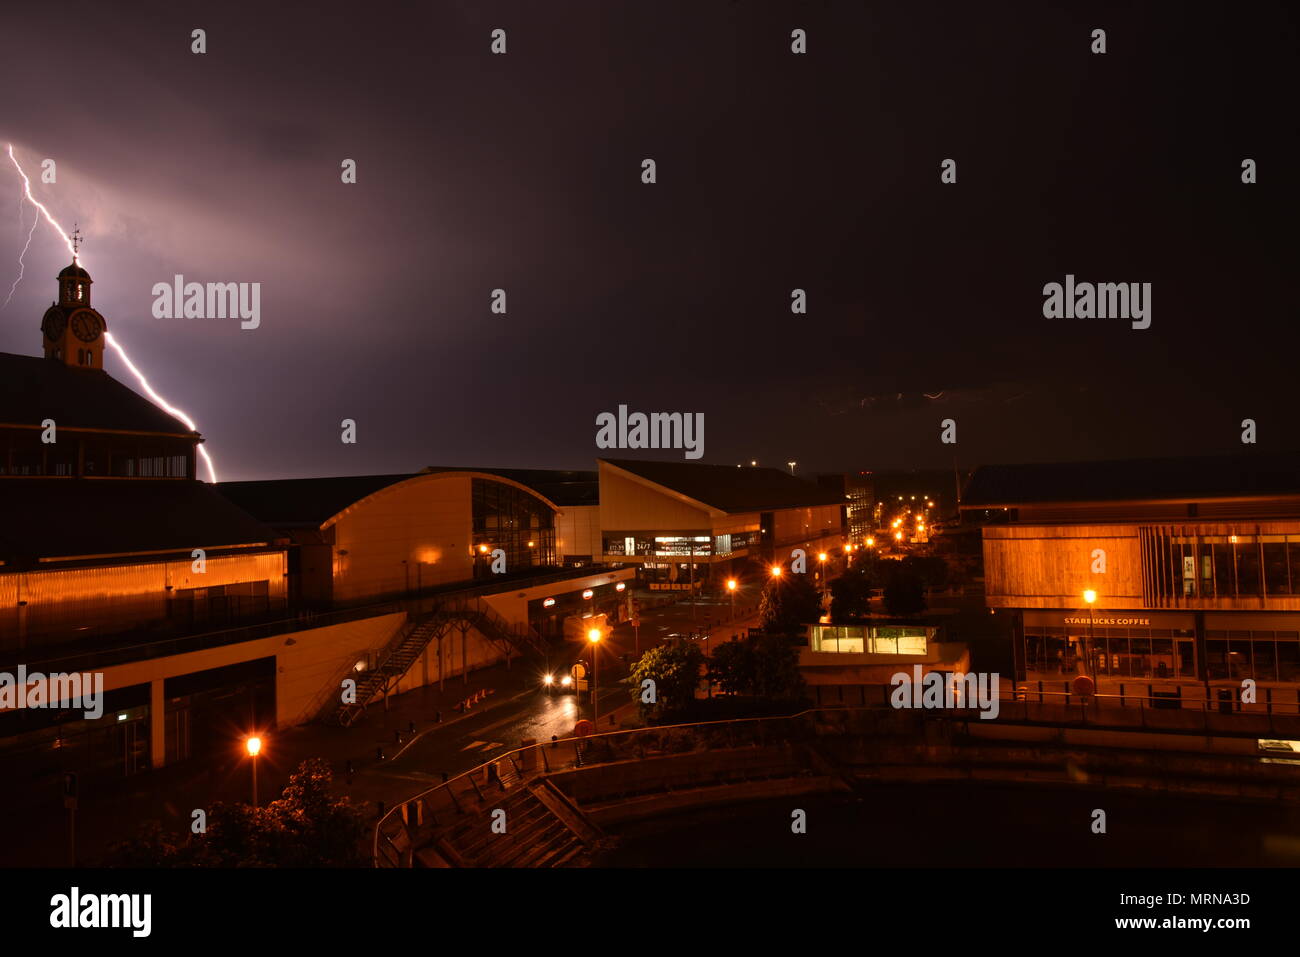 Chatham, Kent, UK, 27th May 2018 Bank holiday storm hits south east England with multiple lightning strikes Credit: stuart bingham/Alamy Live News Stock Photo